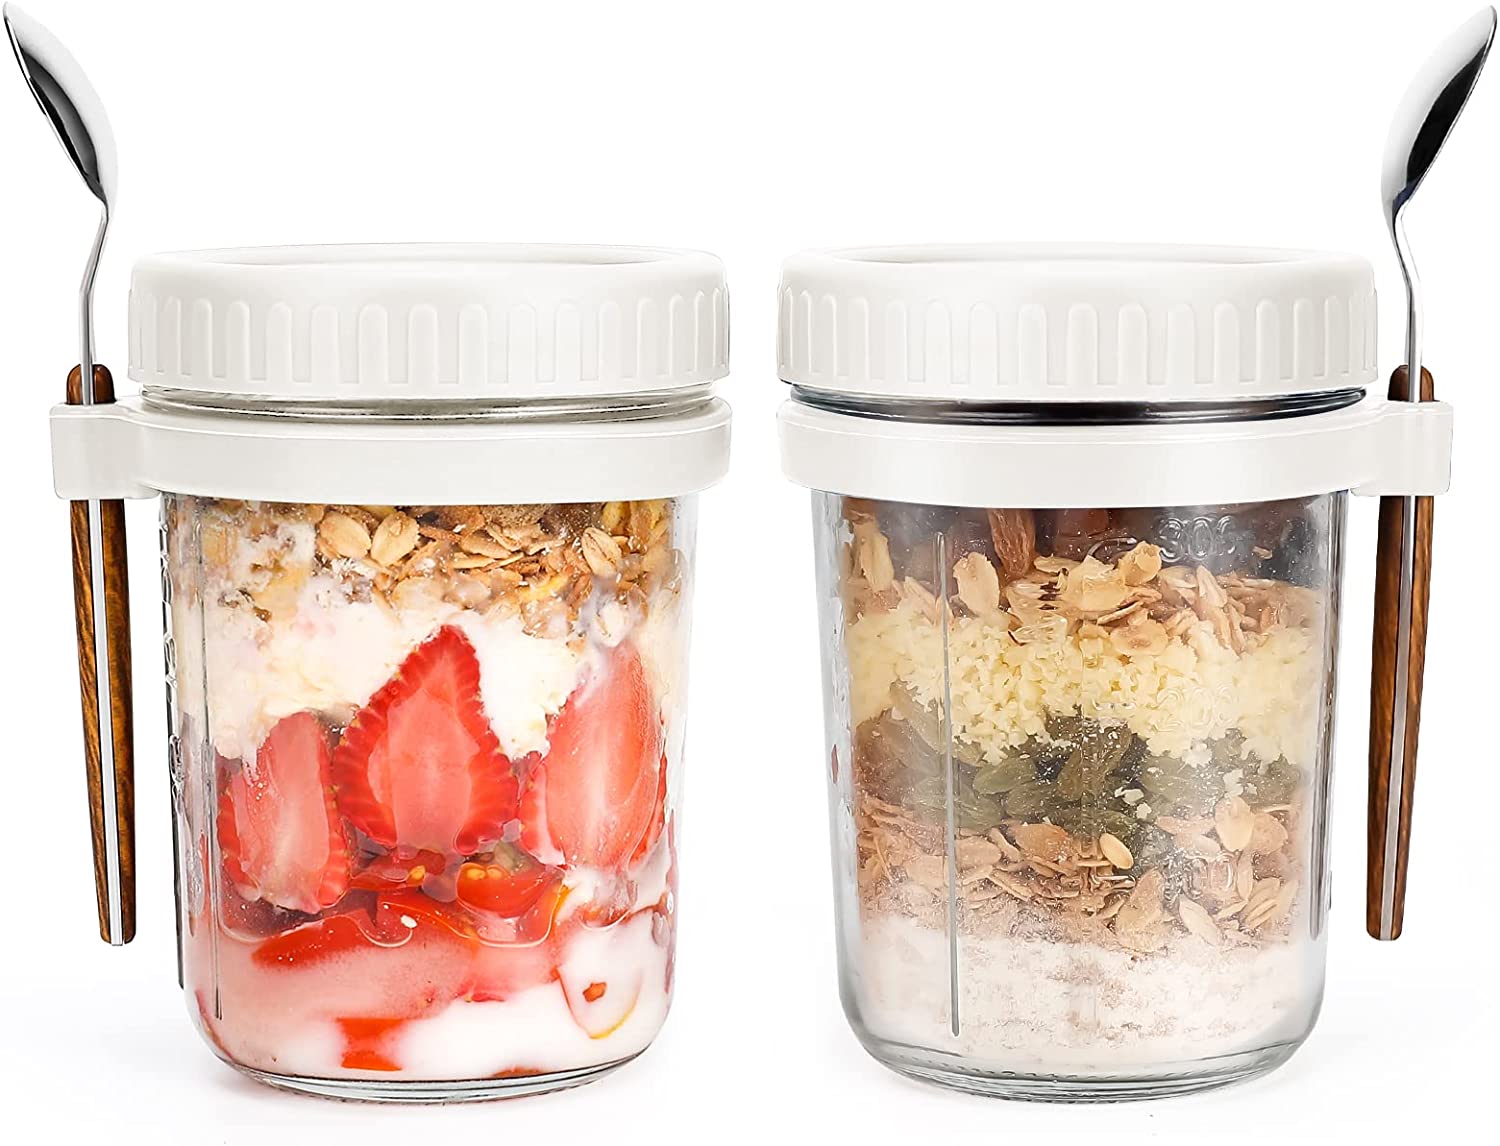 KITCHOP Overnight Oats Containers with Lids and Spoon,Mason Jars,16 Oz  Glass Oatmeal Container to Go for Chia Pudding Yogurt Salad Cereal Meal  Prep